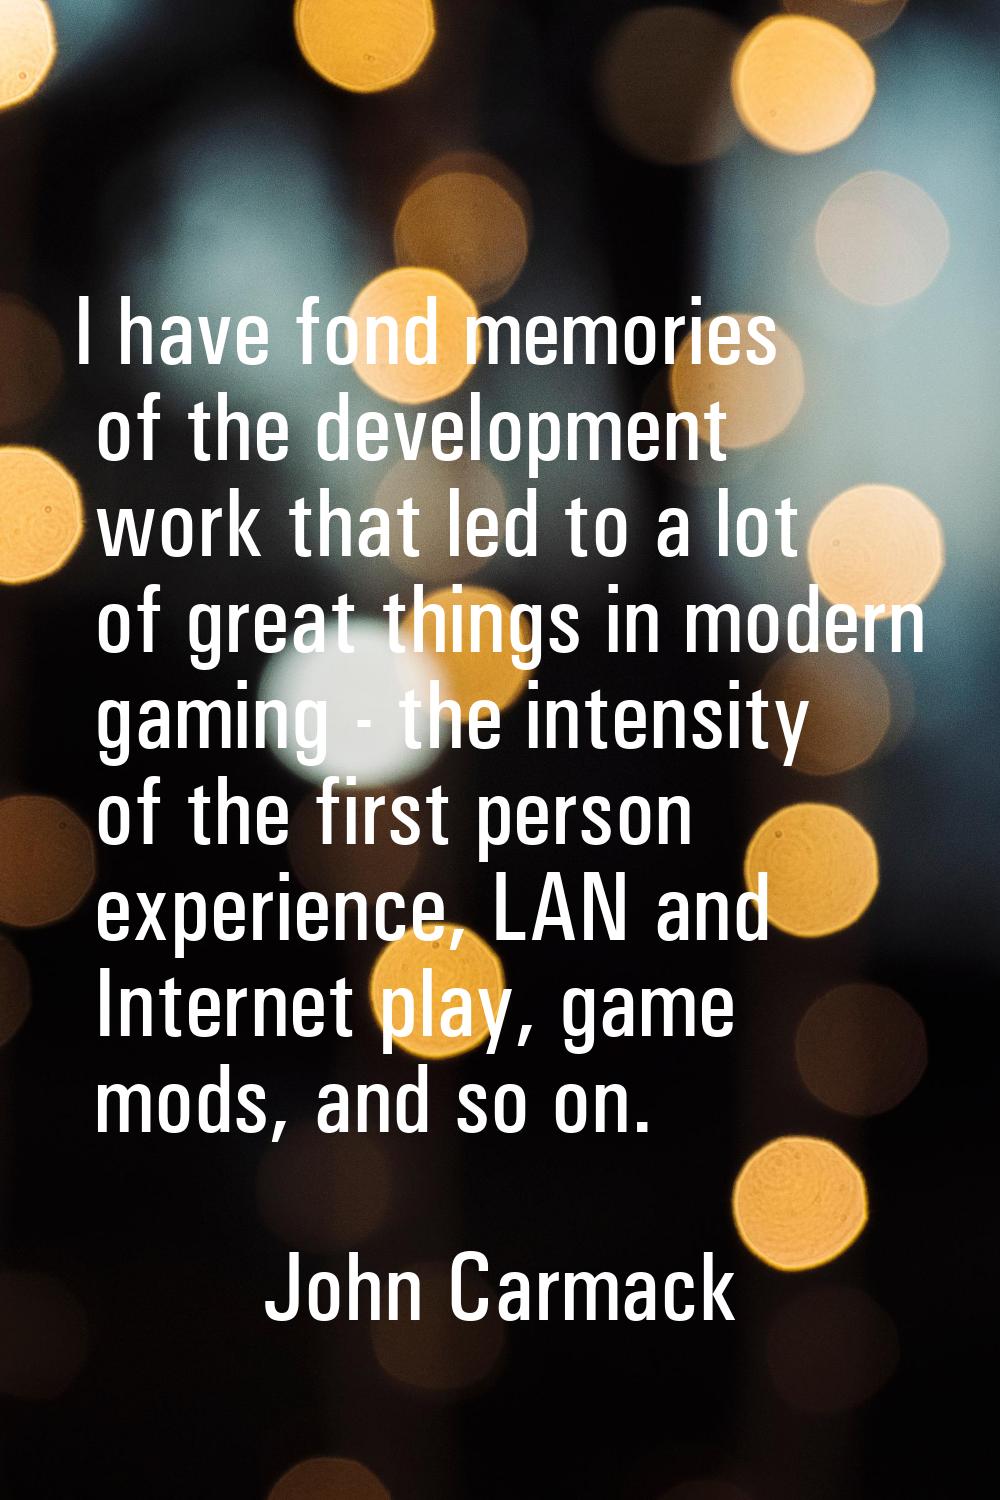 I have fond memories of the development work that led to a lot of great things in modern gaming - t